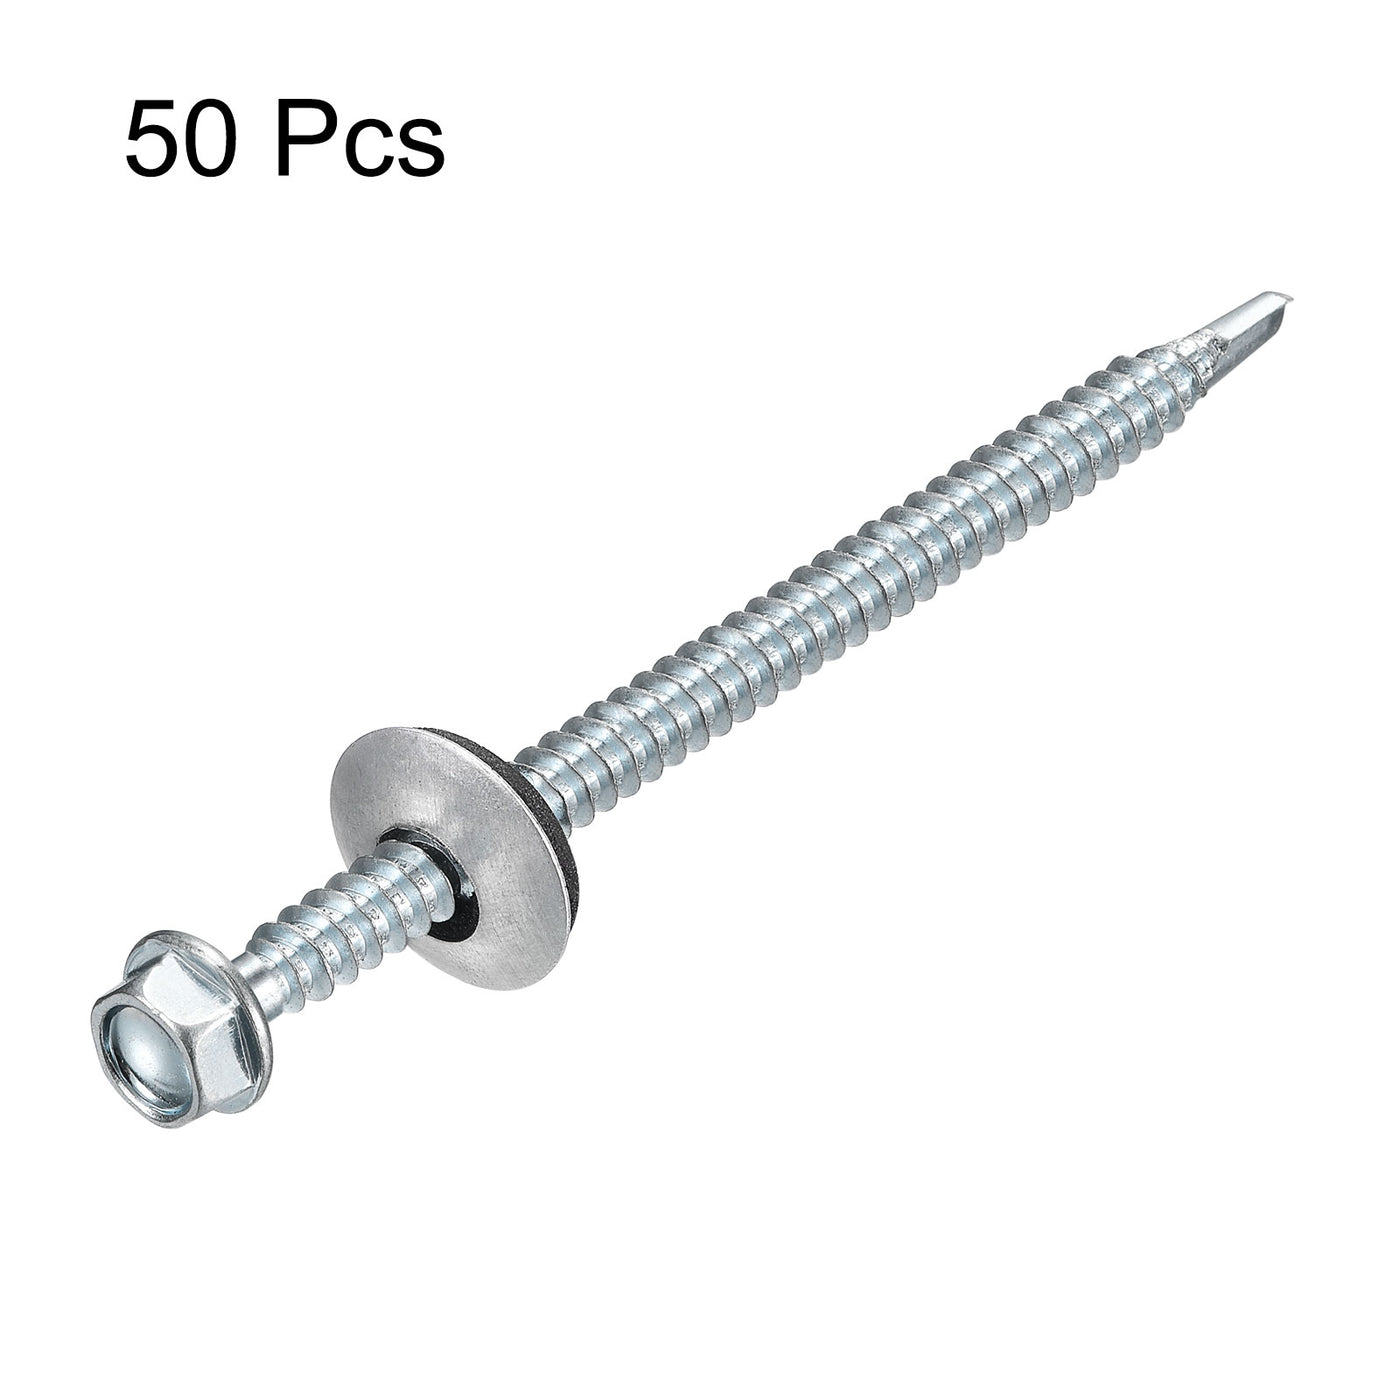 uxcell Uxcell #12 x 3-9/16" Self Drilling Screws, 50pcs Roofing Screws with EPDM Washer